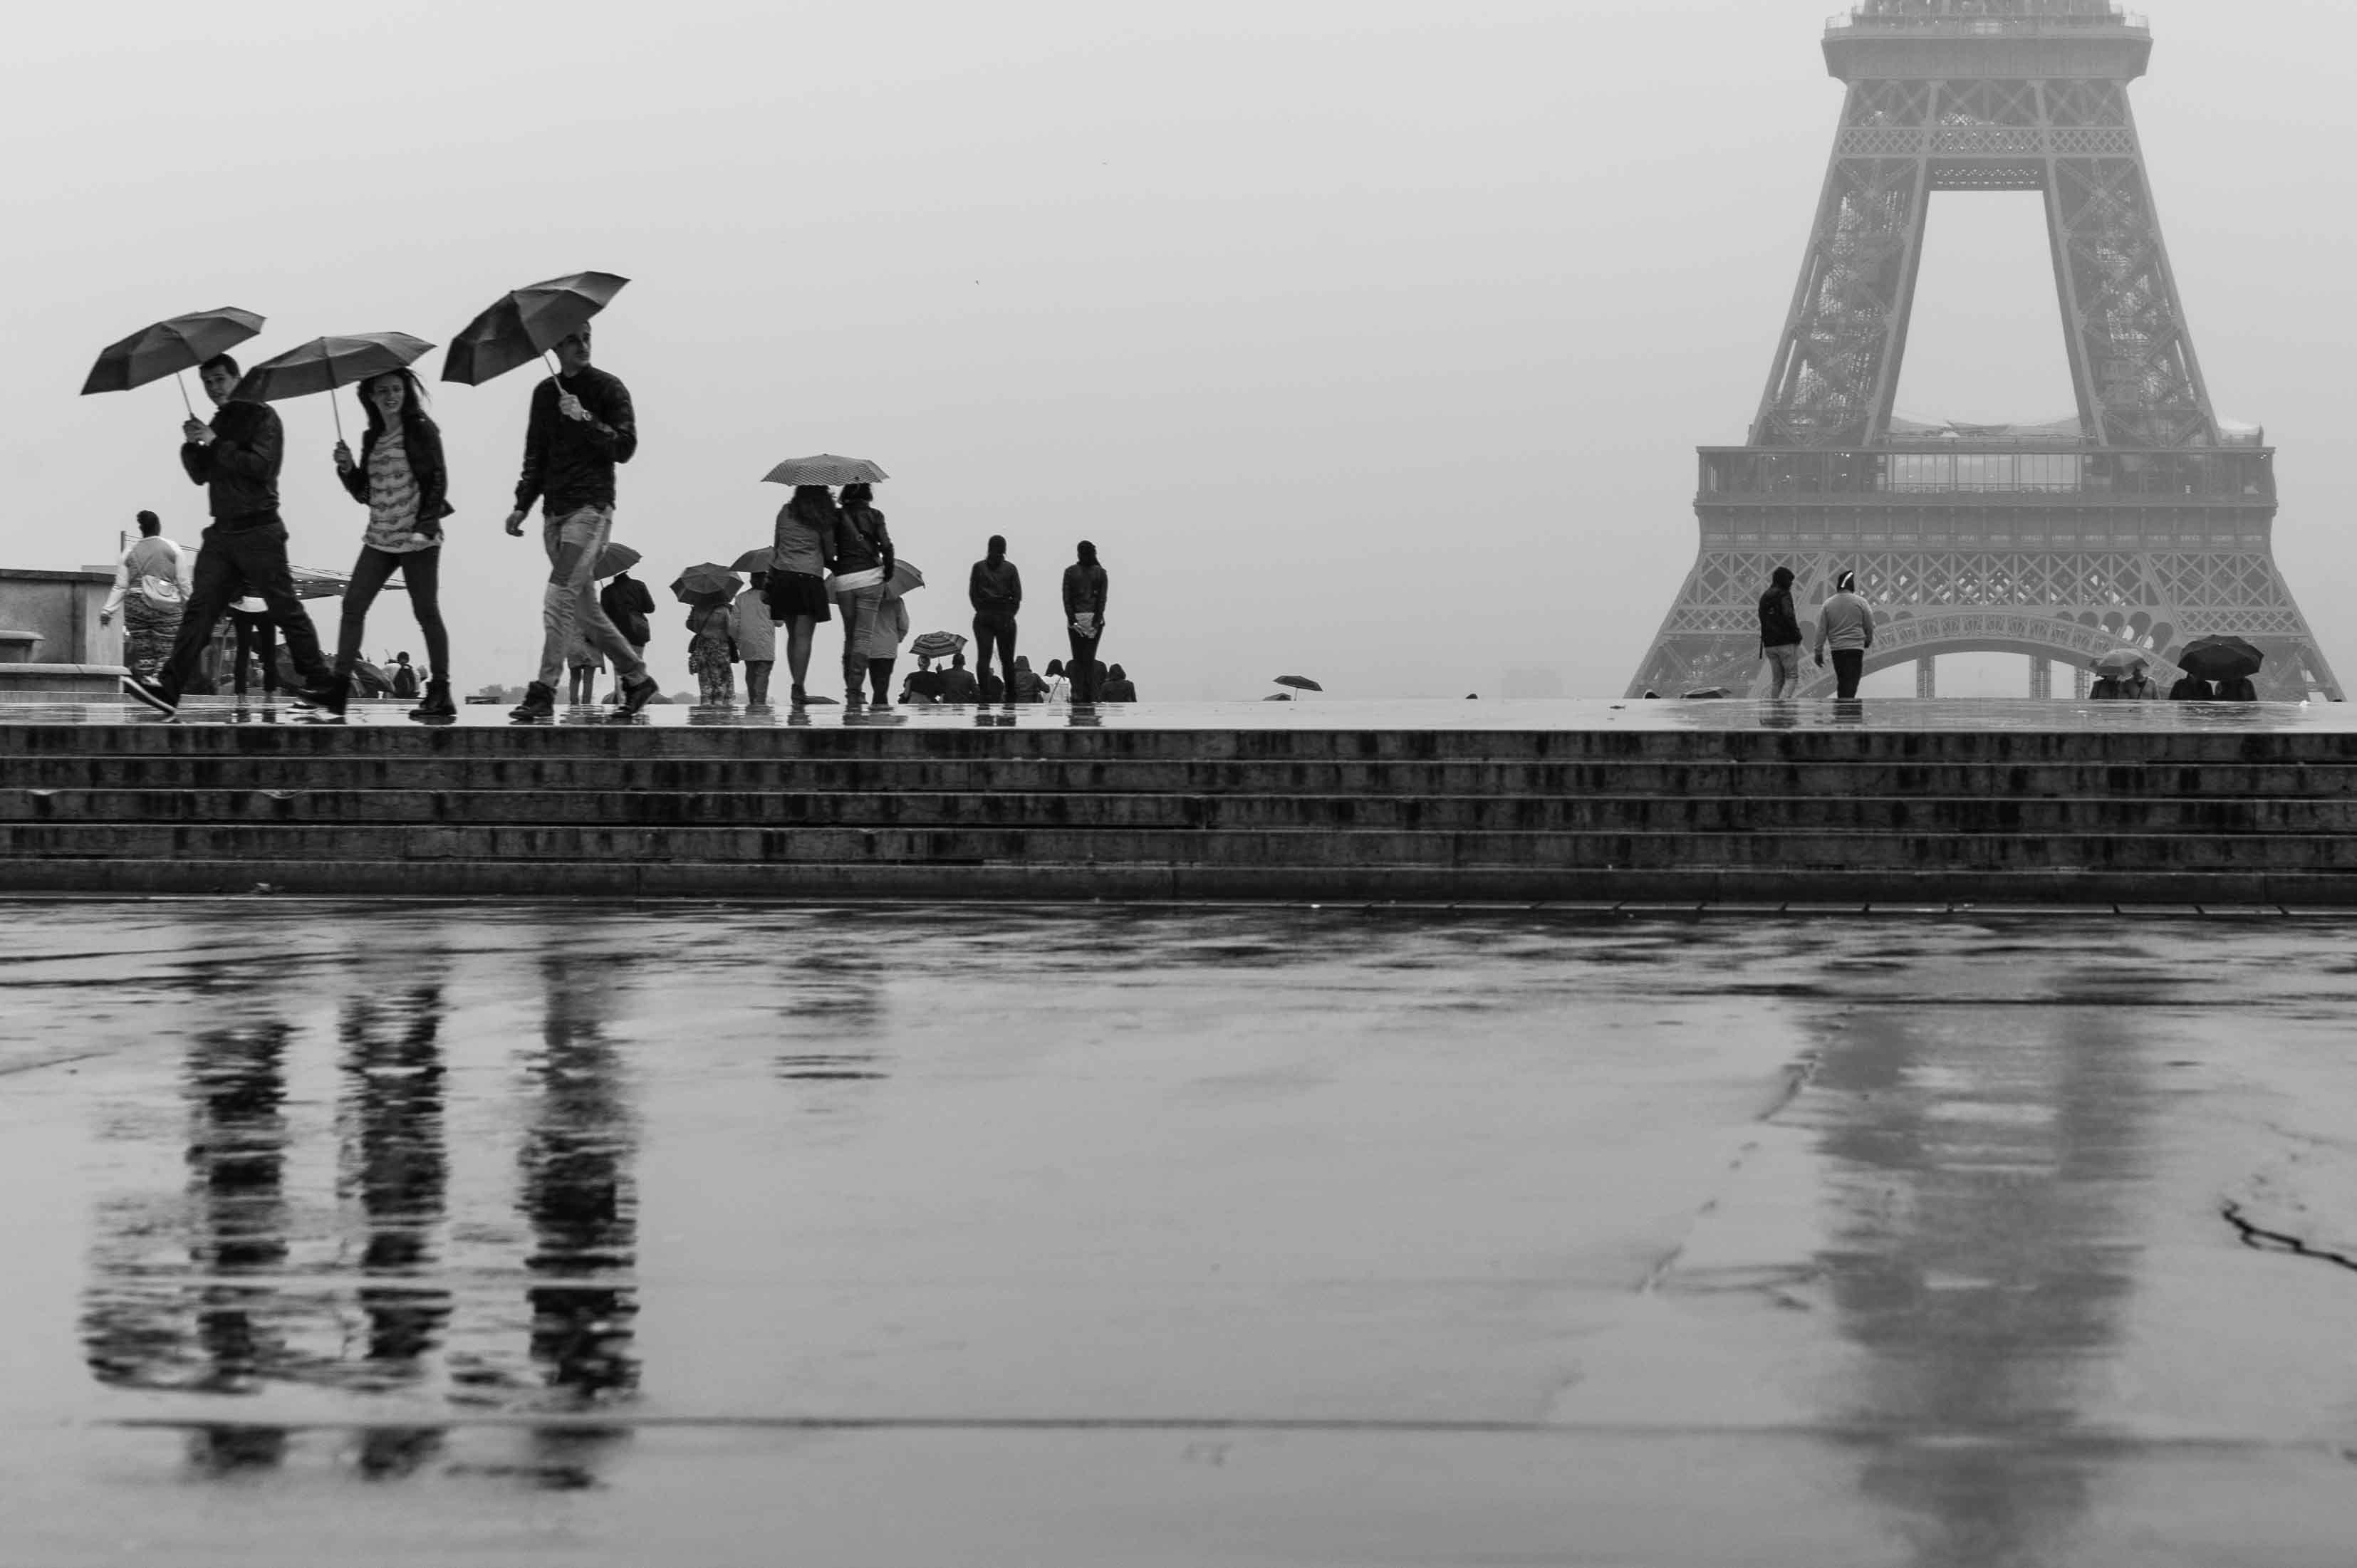 Eiffel Tower in the rain, black and white photo wallpaper